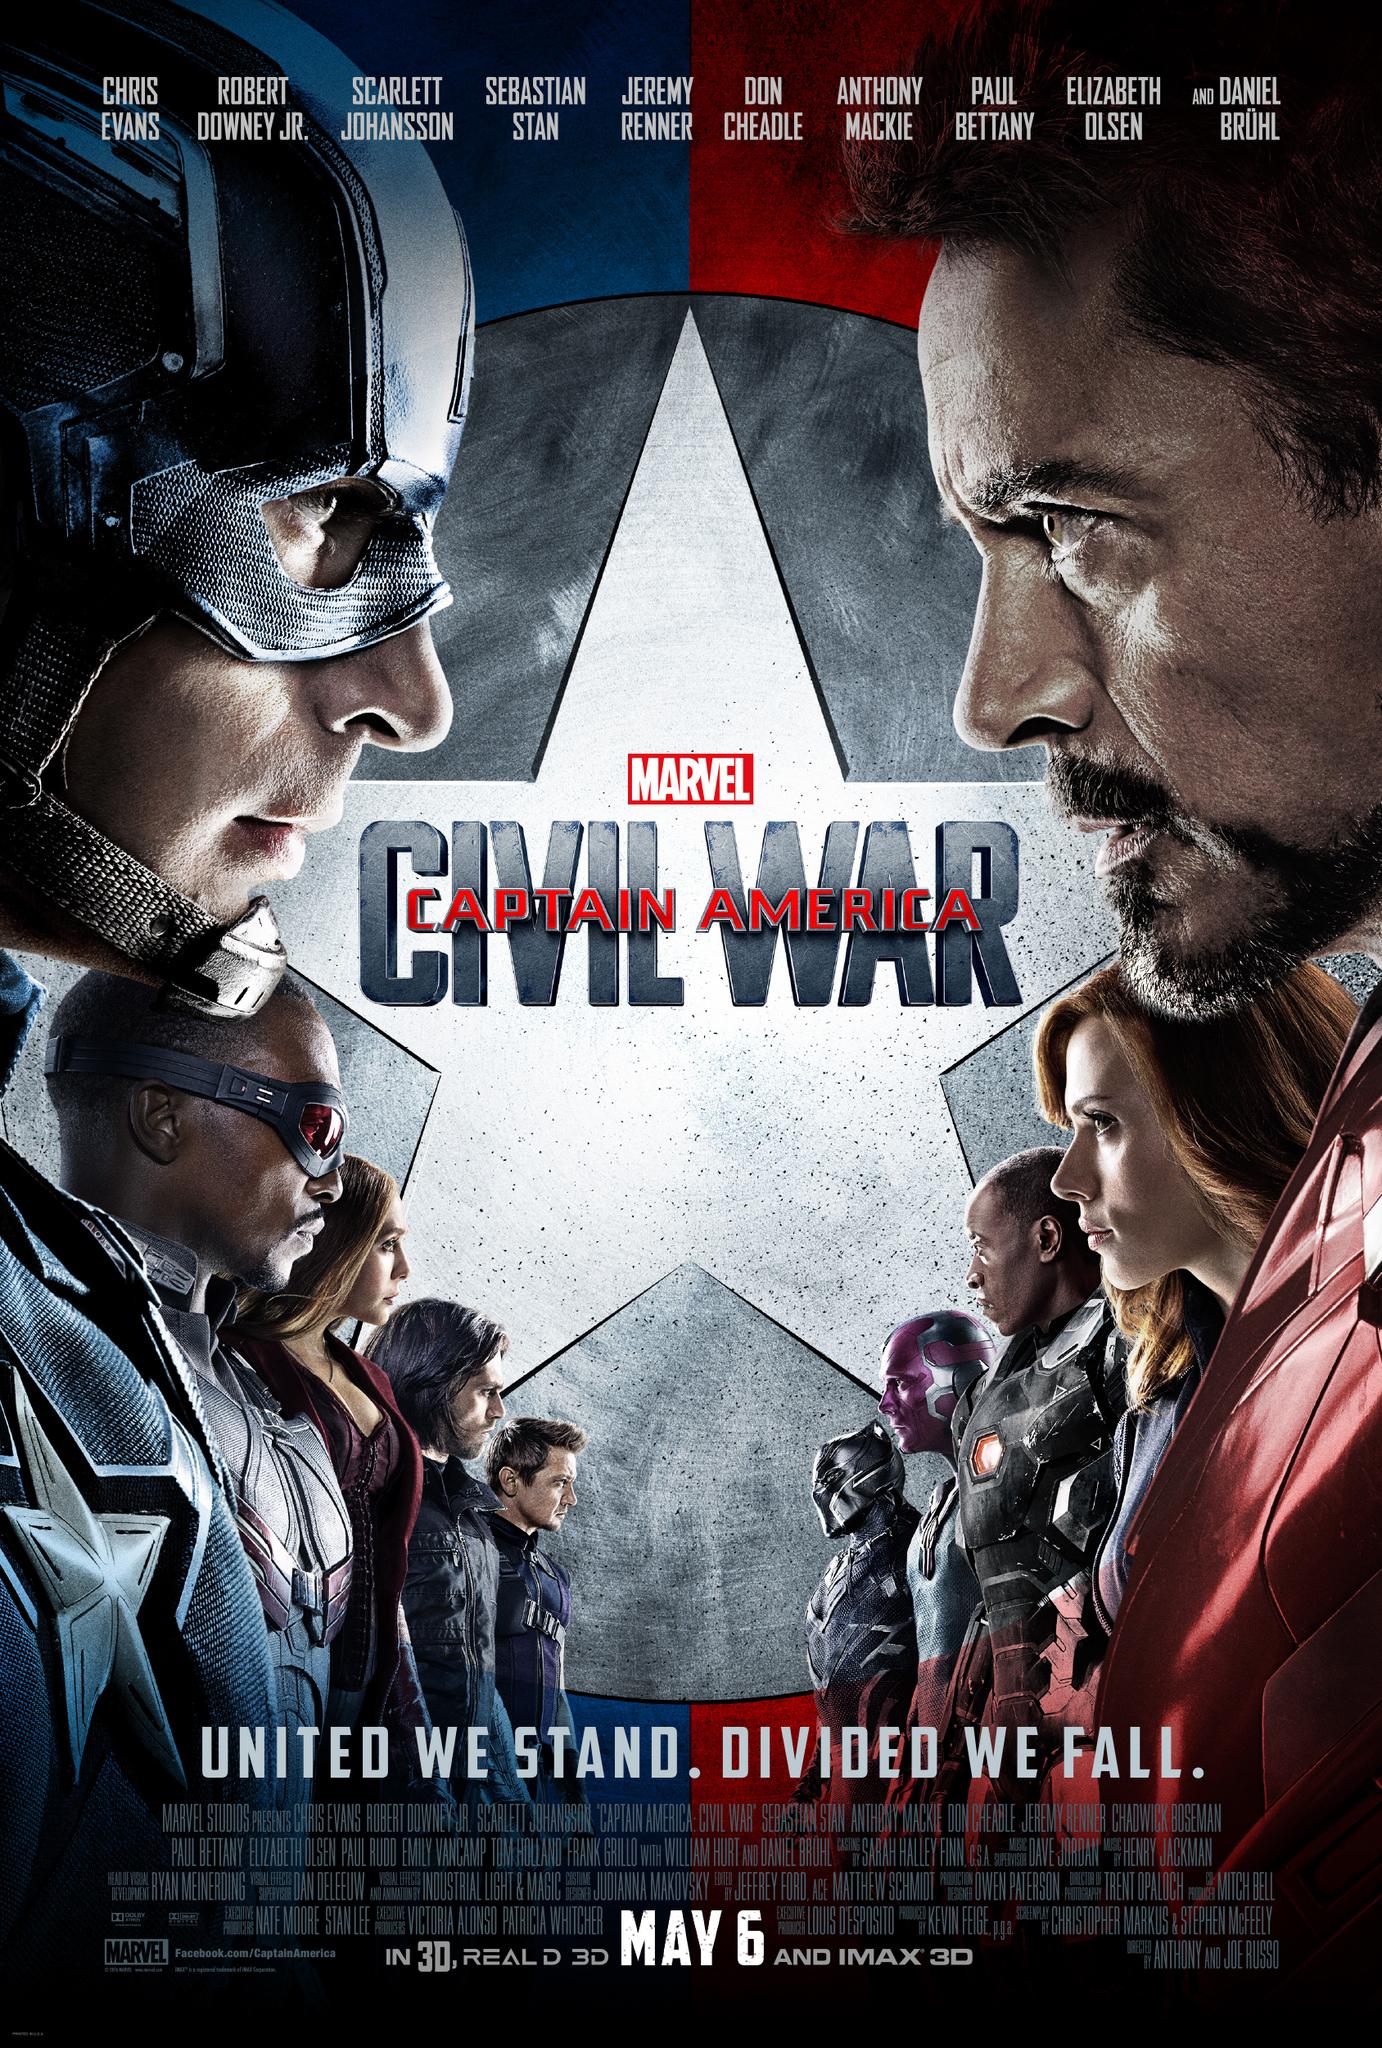 Phase Three (2016-2019)
Captain America: Civil War: Released on May 6, 2016, immerses viewers in an intense and emotionally charged conflict that stands as one of the most pivotal moments in the Marvel Cinematic Universe. 